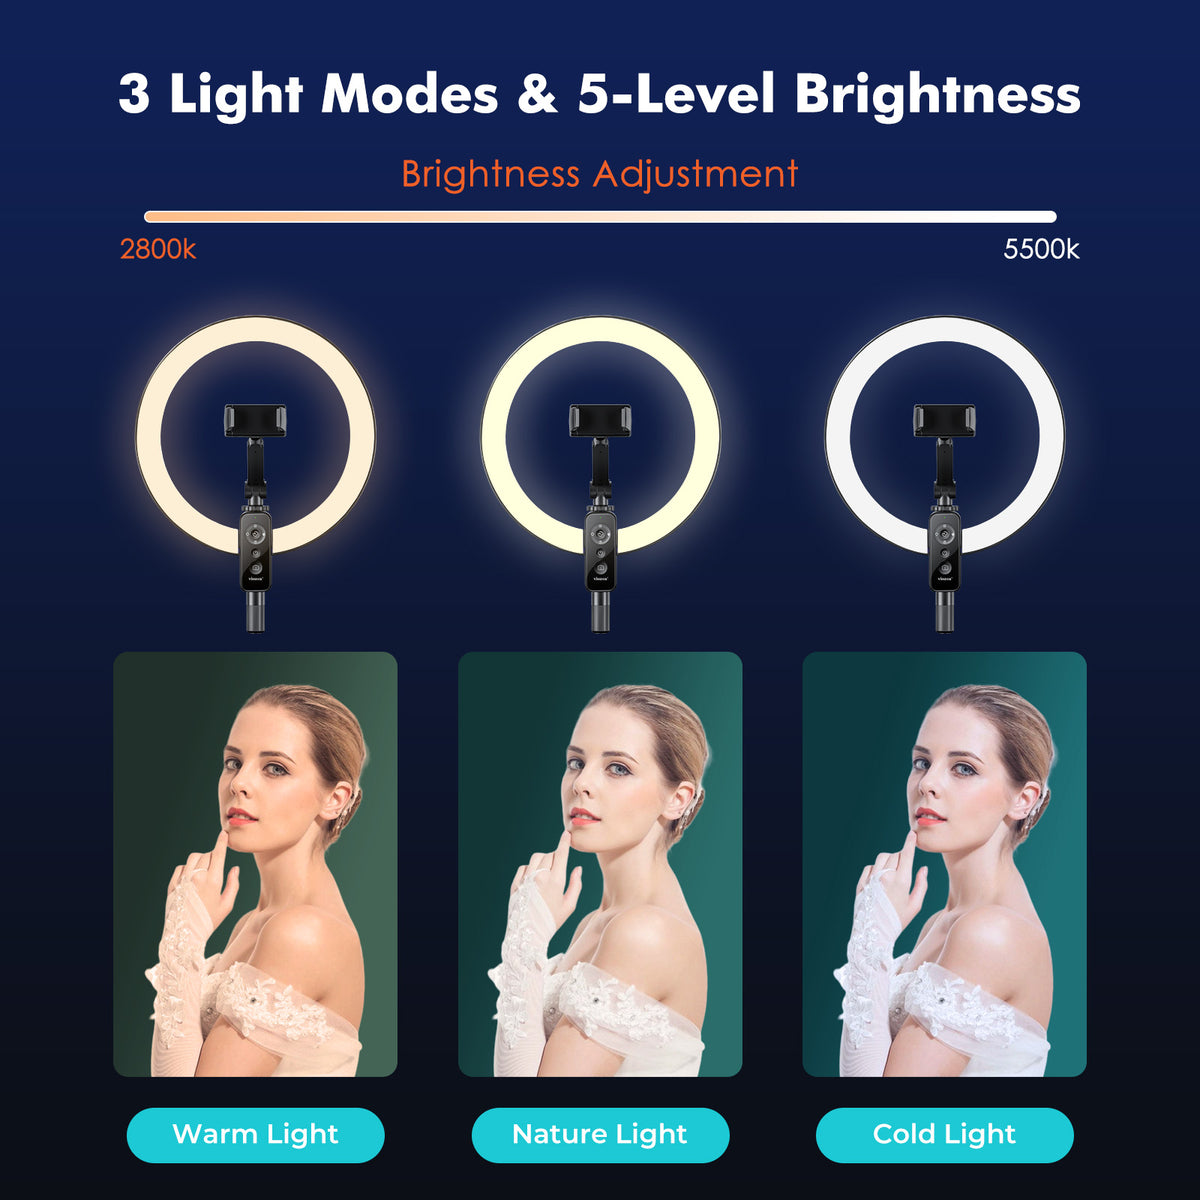 Viozon Selfie Desktop Live Stand Set  with 12&quot; LED Ring Light Overhead Shooting &amp; Adjustable Mount Compatible with Phone/Camera for Live Steaming 5 in 1 (LT-2ZB)